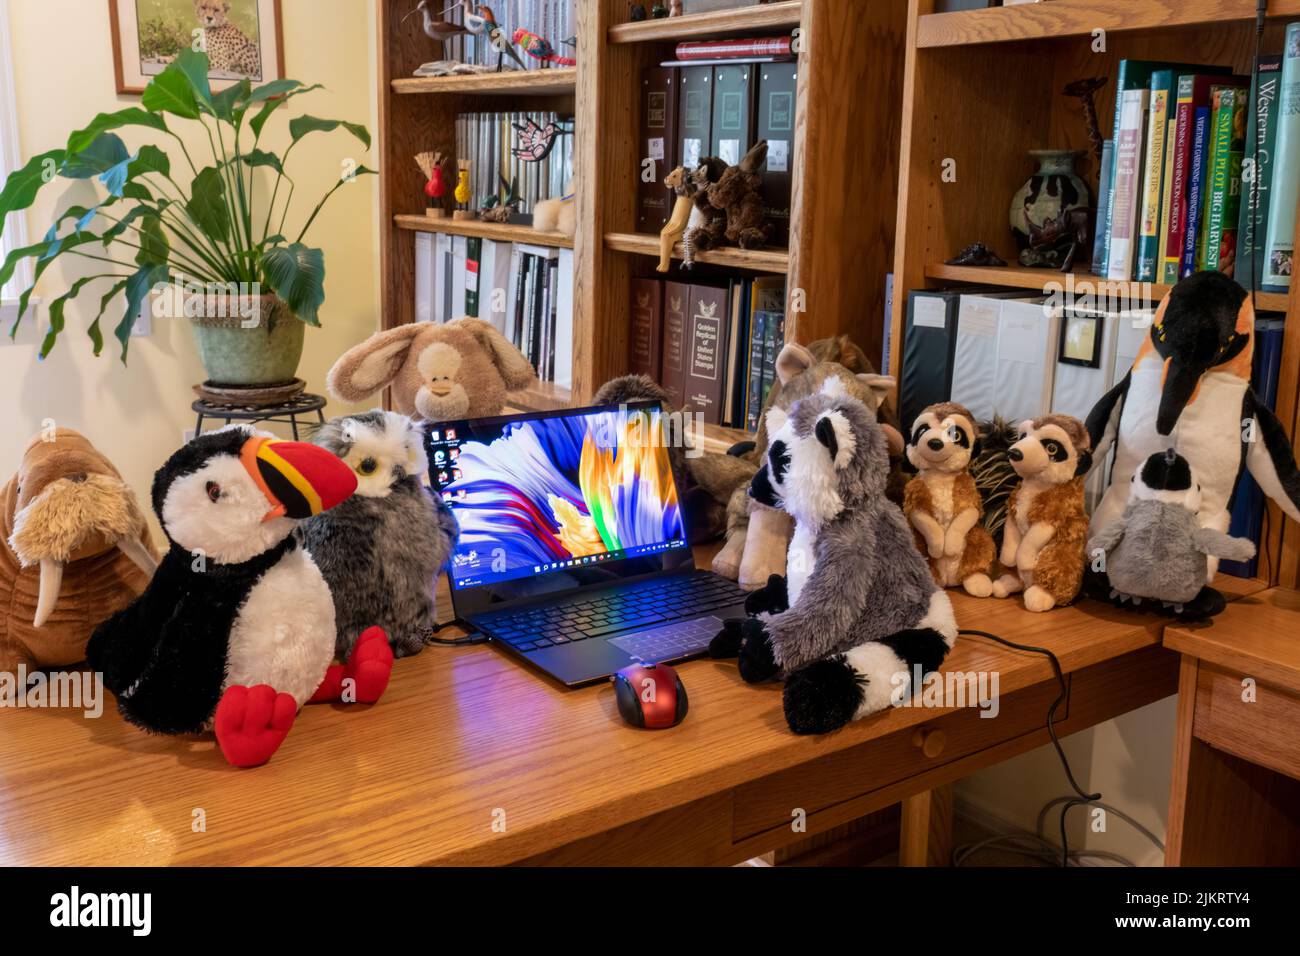 Issaquah, Washington, USA.  Laptop PC surrounded by a collection of stuffed animals, with a Ring-tailed Lemur gazing at the PC. Stock Photo